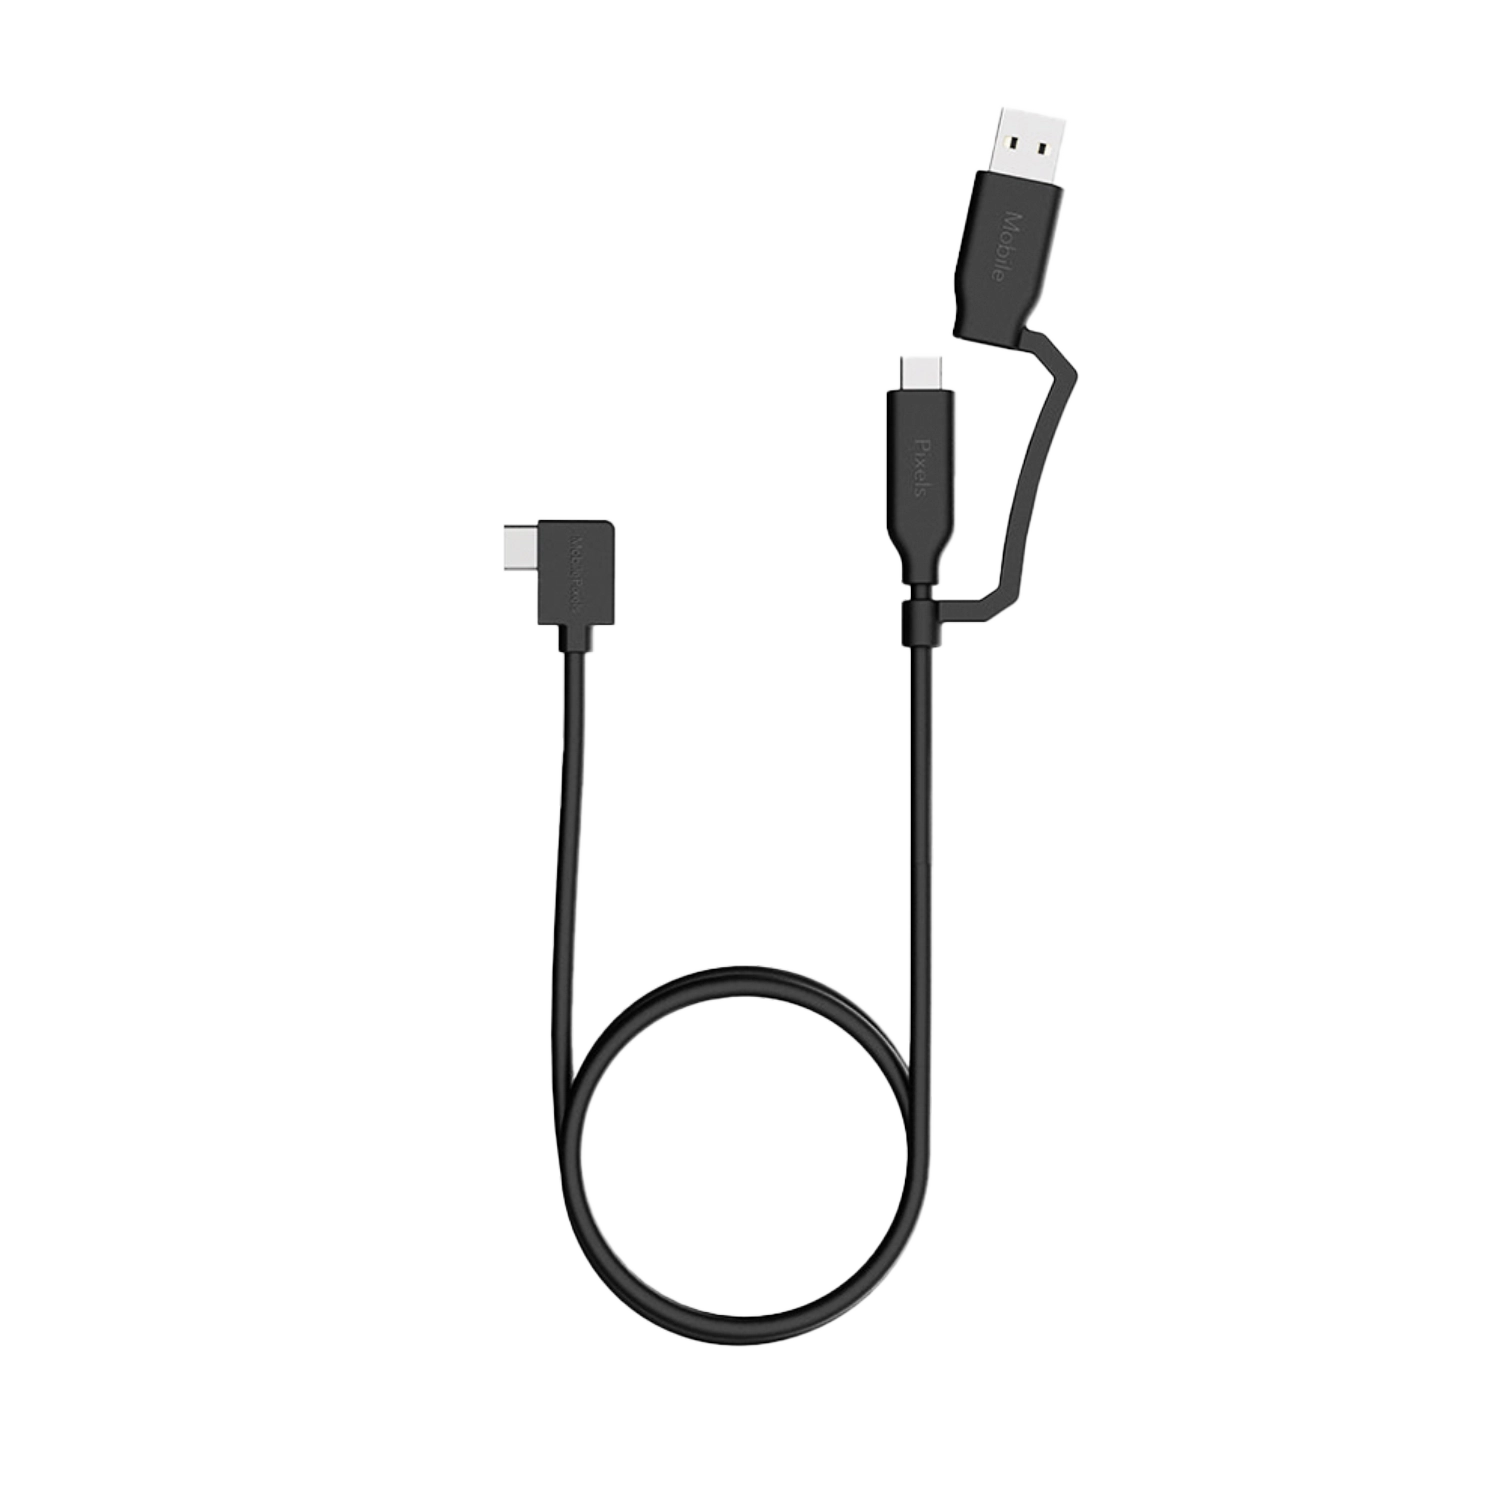 Laptop Monitor Data Cable